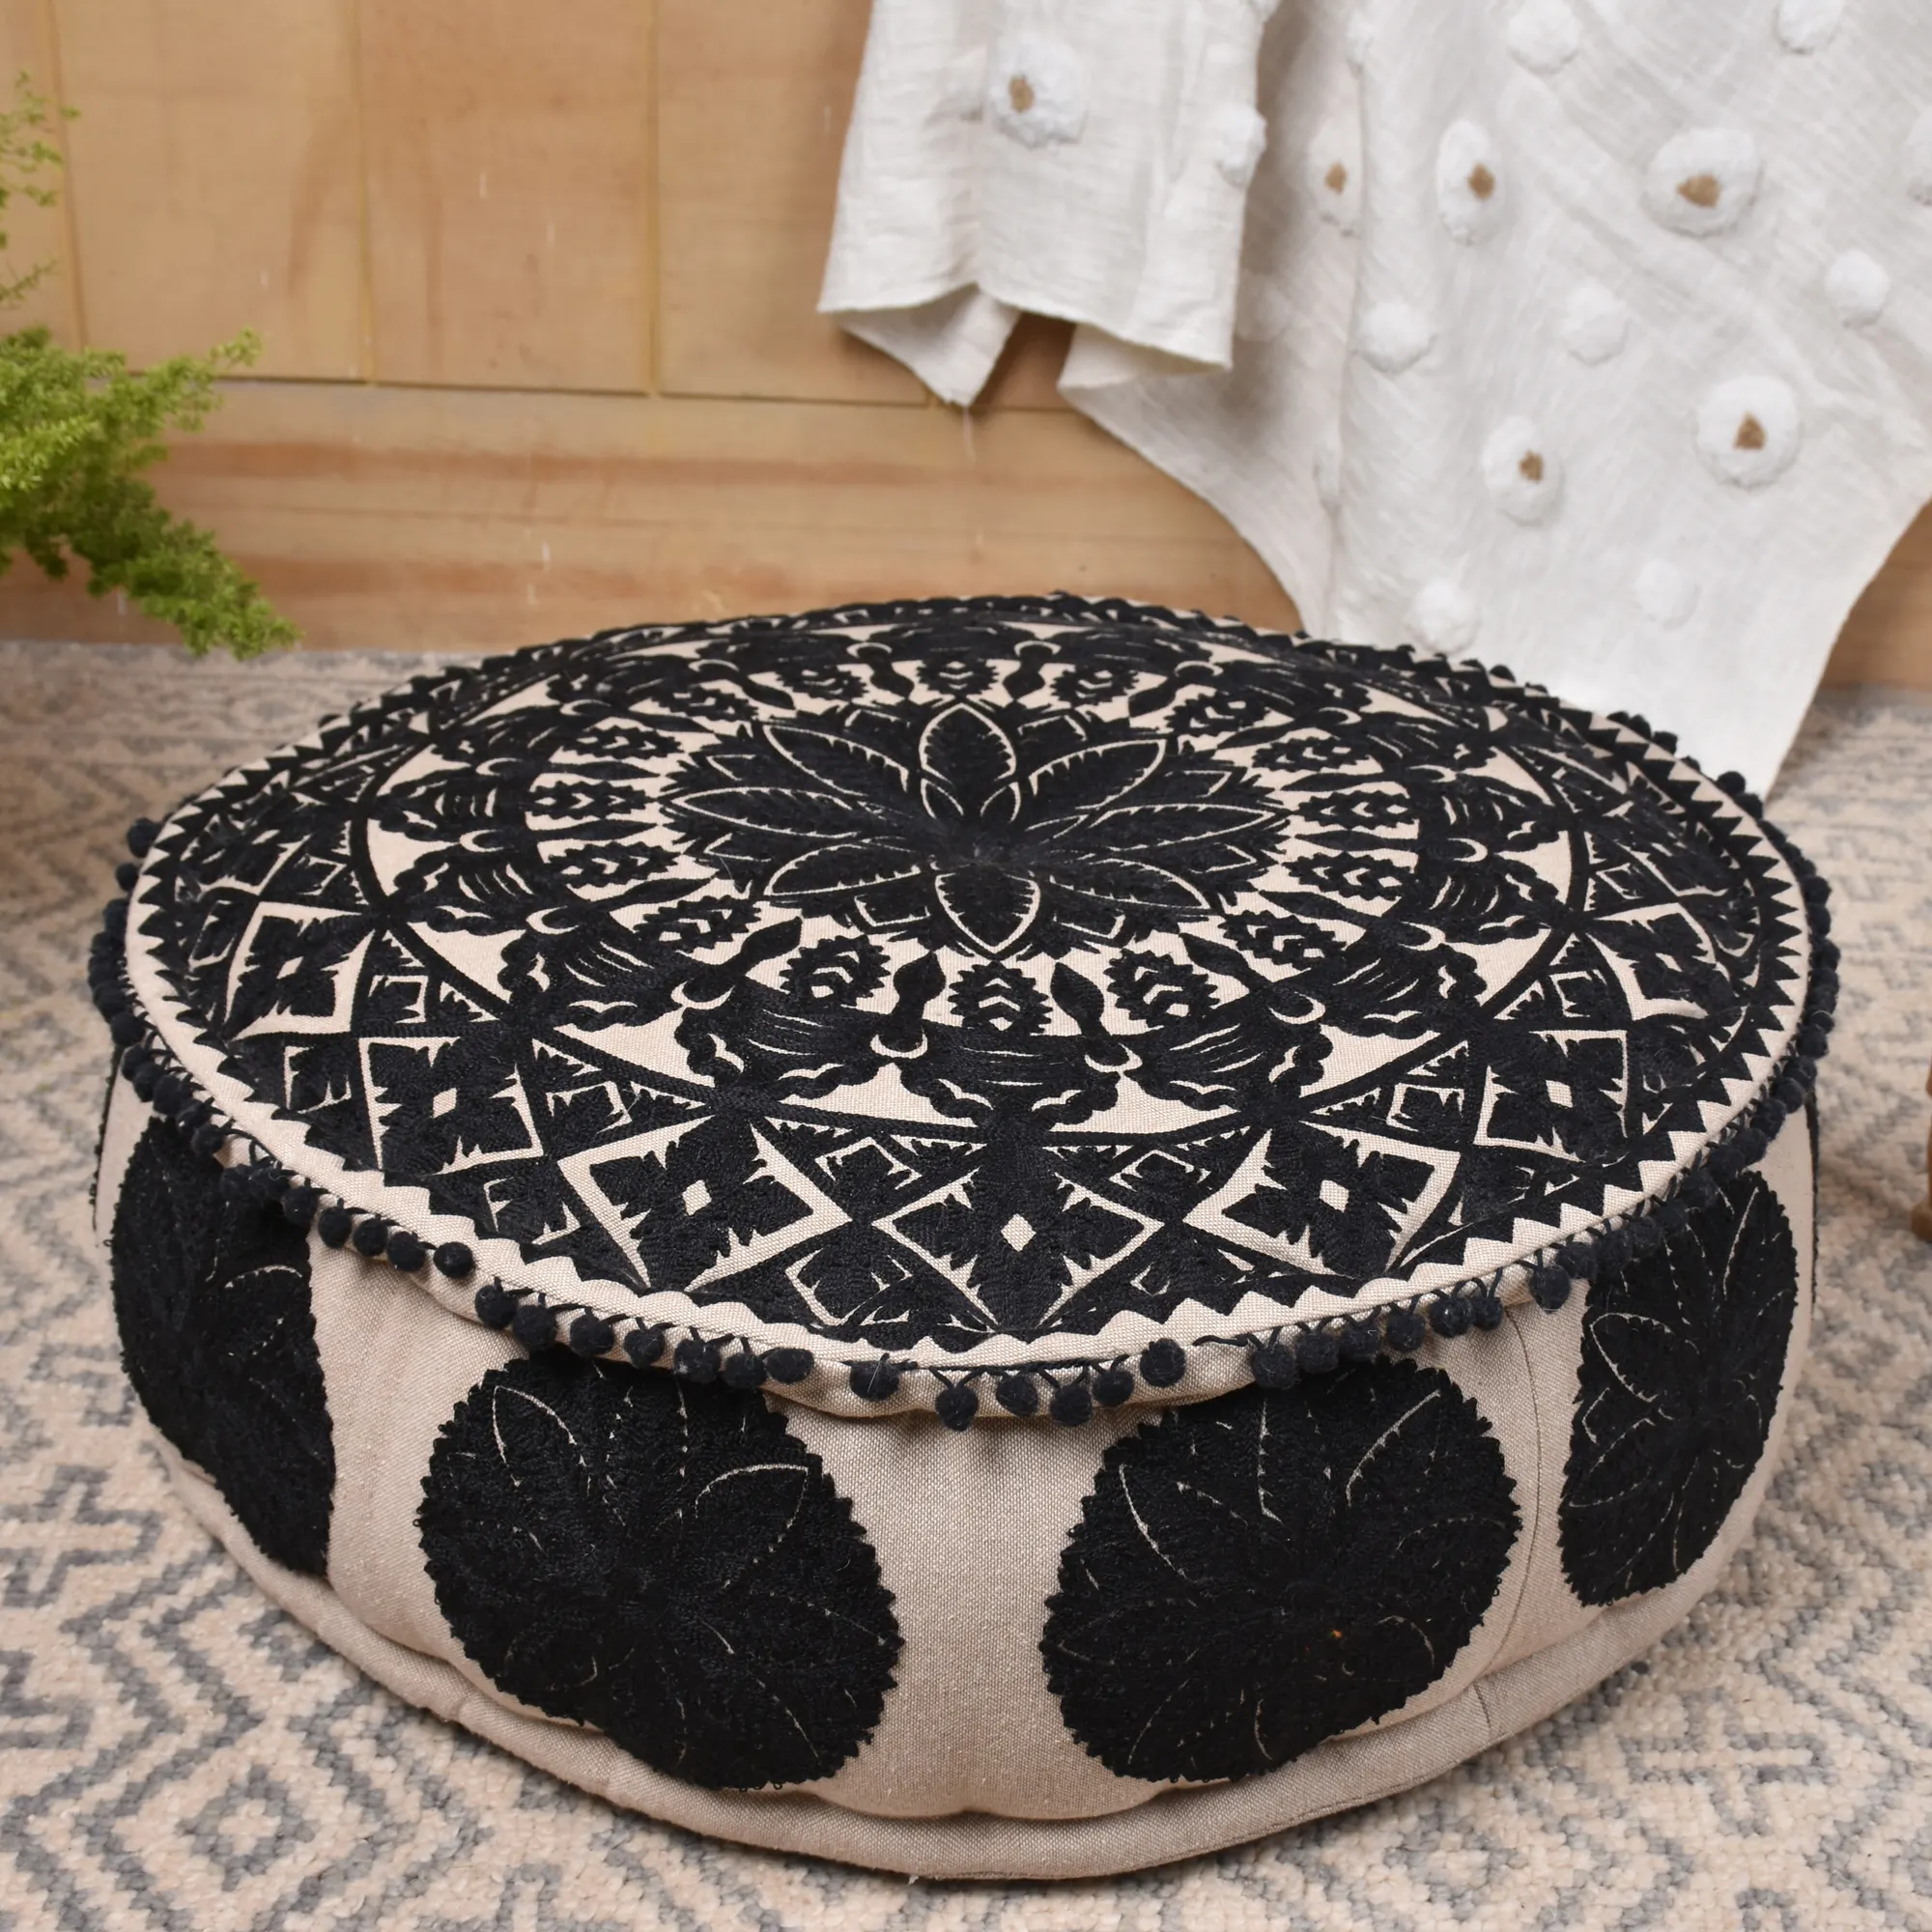 New Arrivals Black Embroidered Pouf Round Bohemian Meditation Ottoman Cover Floor Large Living Room Home Stool   Ottoman